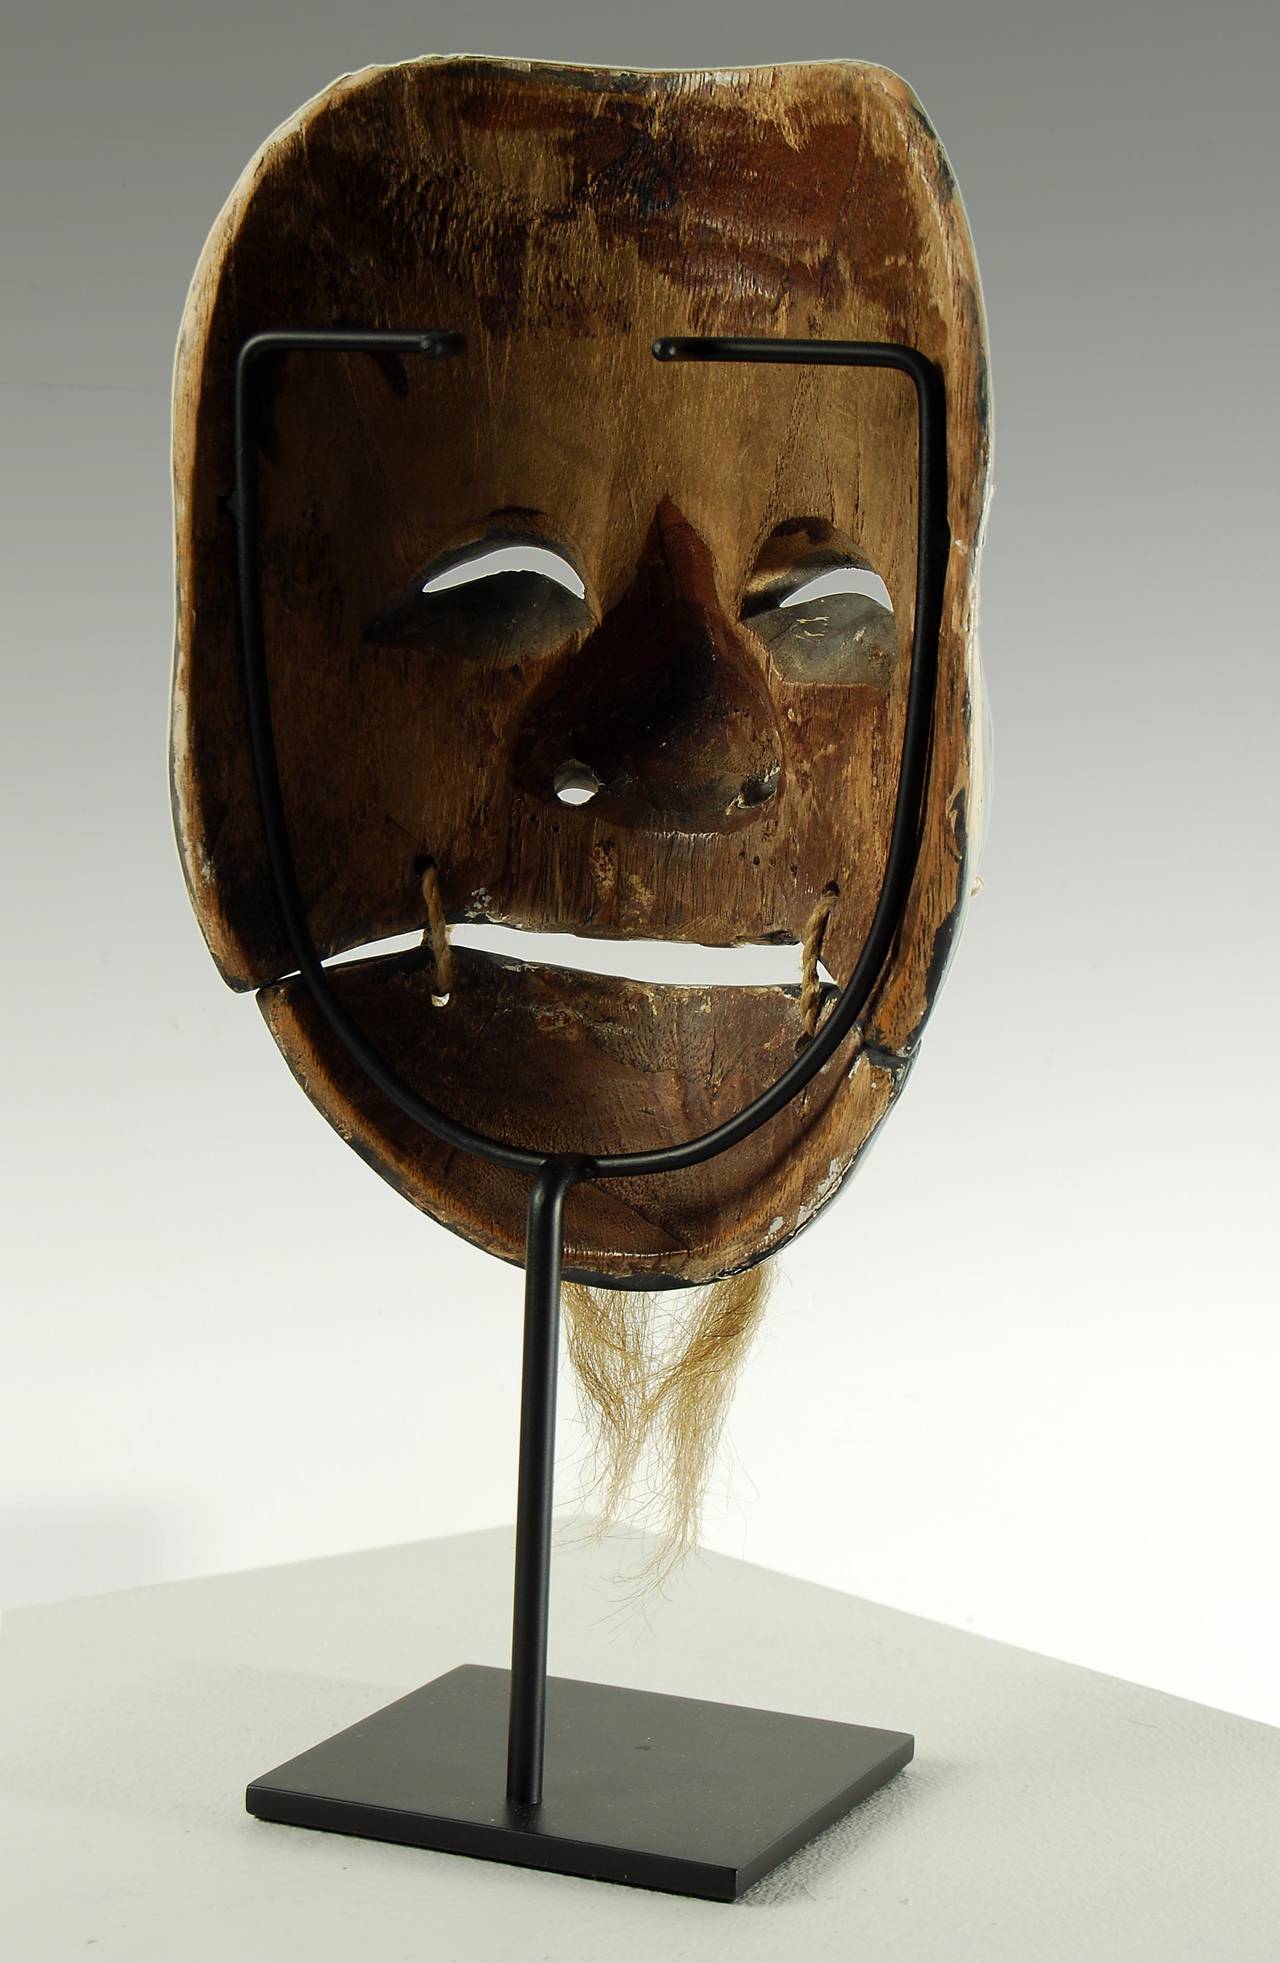 Antique Japanese carved and lacquered Noh Theatre mask on stand, Edo period, 18th Century.

Dimensions: H 21 cm x W 14 cm x D 8 cm.